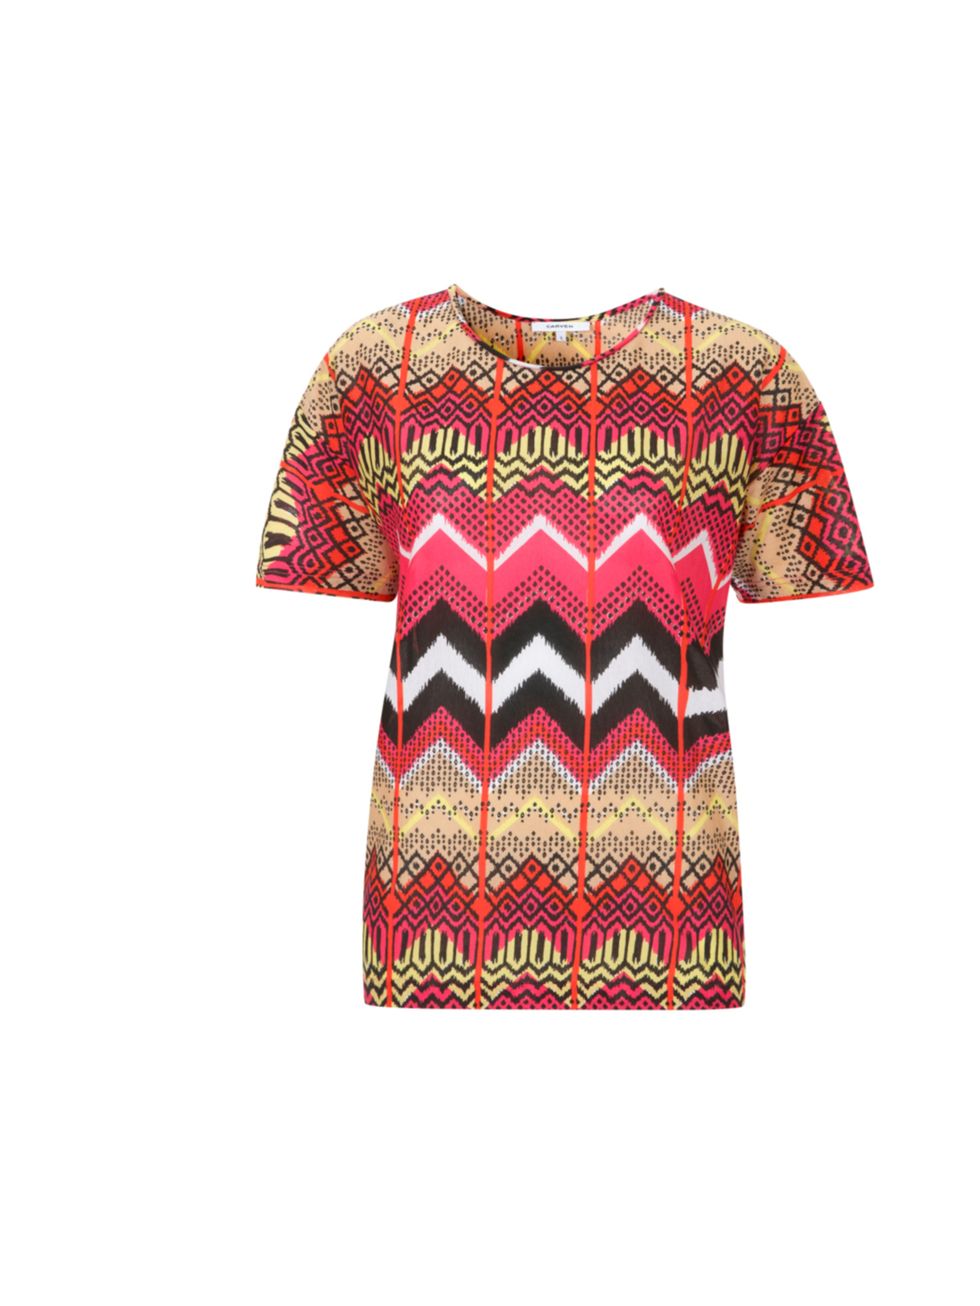 <p>Set the bar high for a bright, pattern-heavy season with this fabulously bold T-shirt... Carven Ikat T-shirt, £125, at Liberty</p><p><a href="http://shopping.elleuk.com/browse?fts=carven+ikat+t-shirt">BUY NOW</a></p>